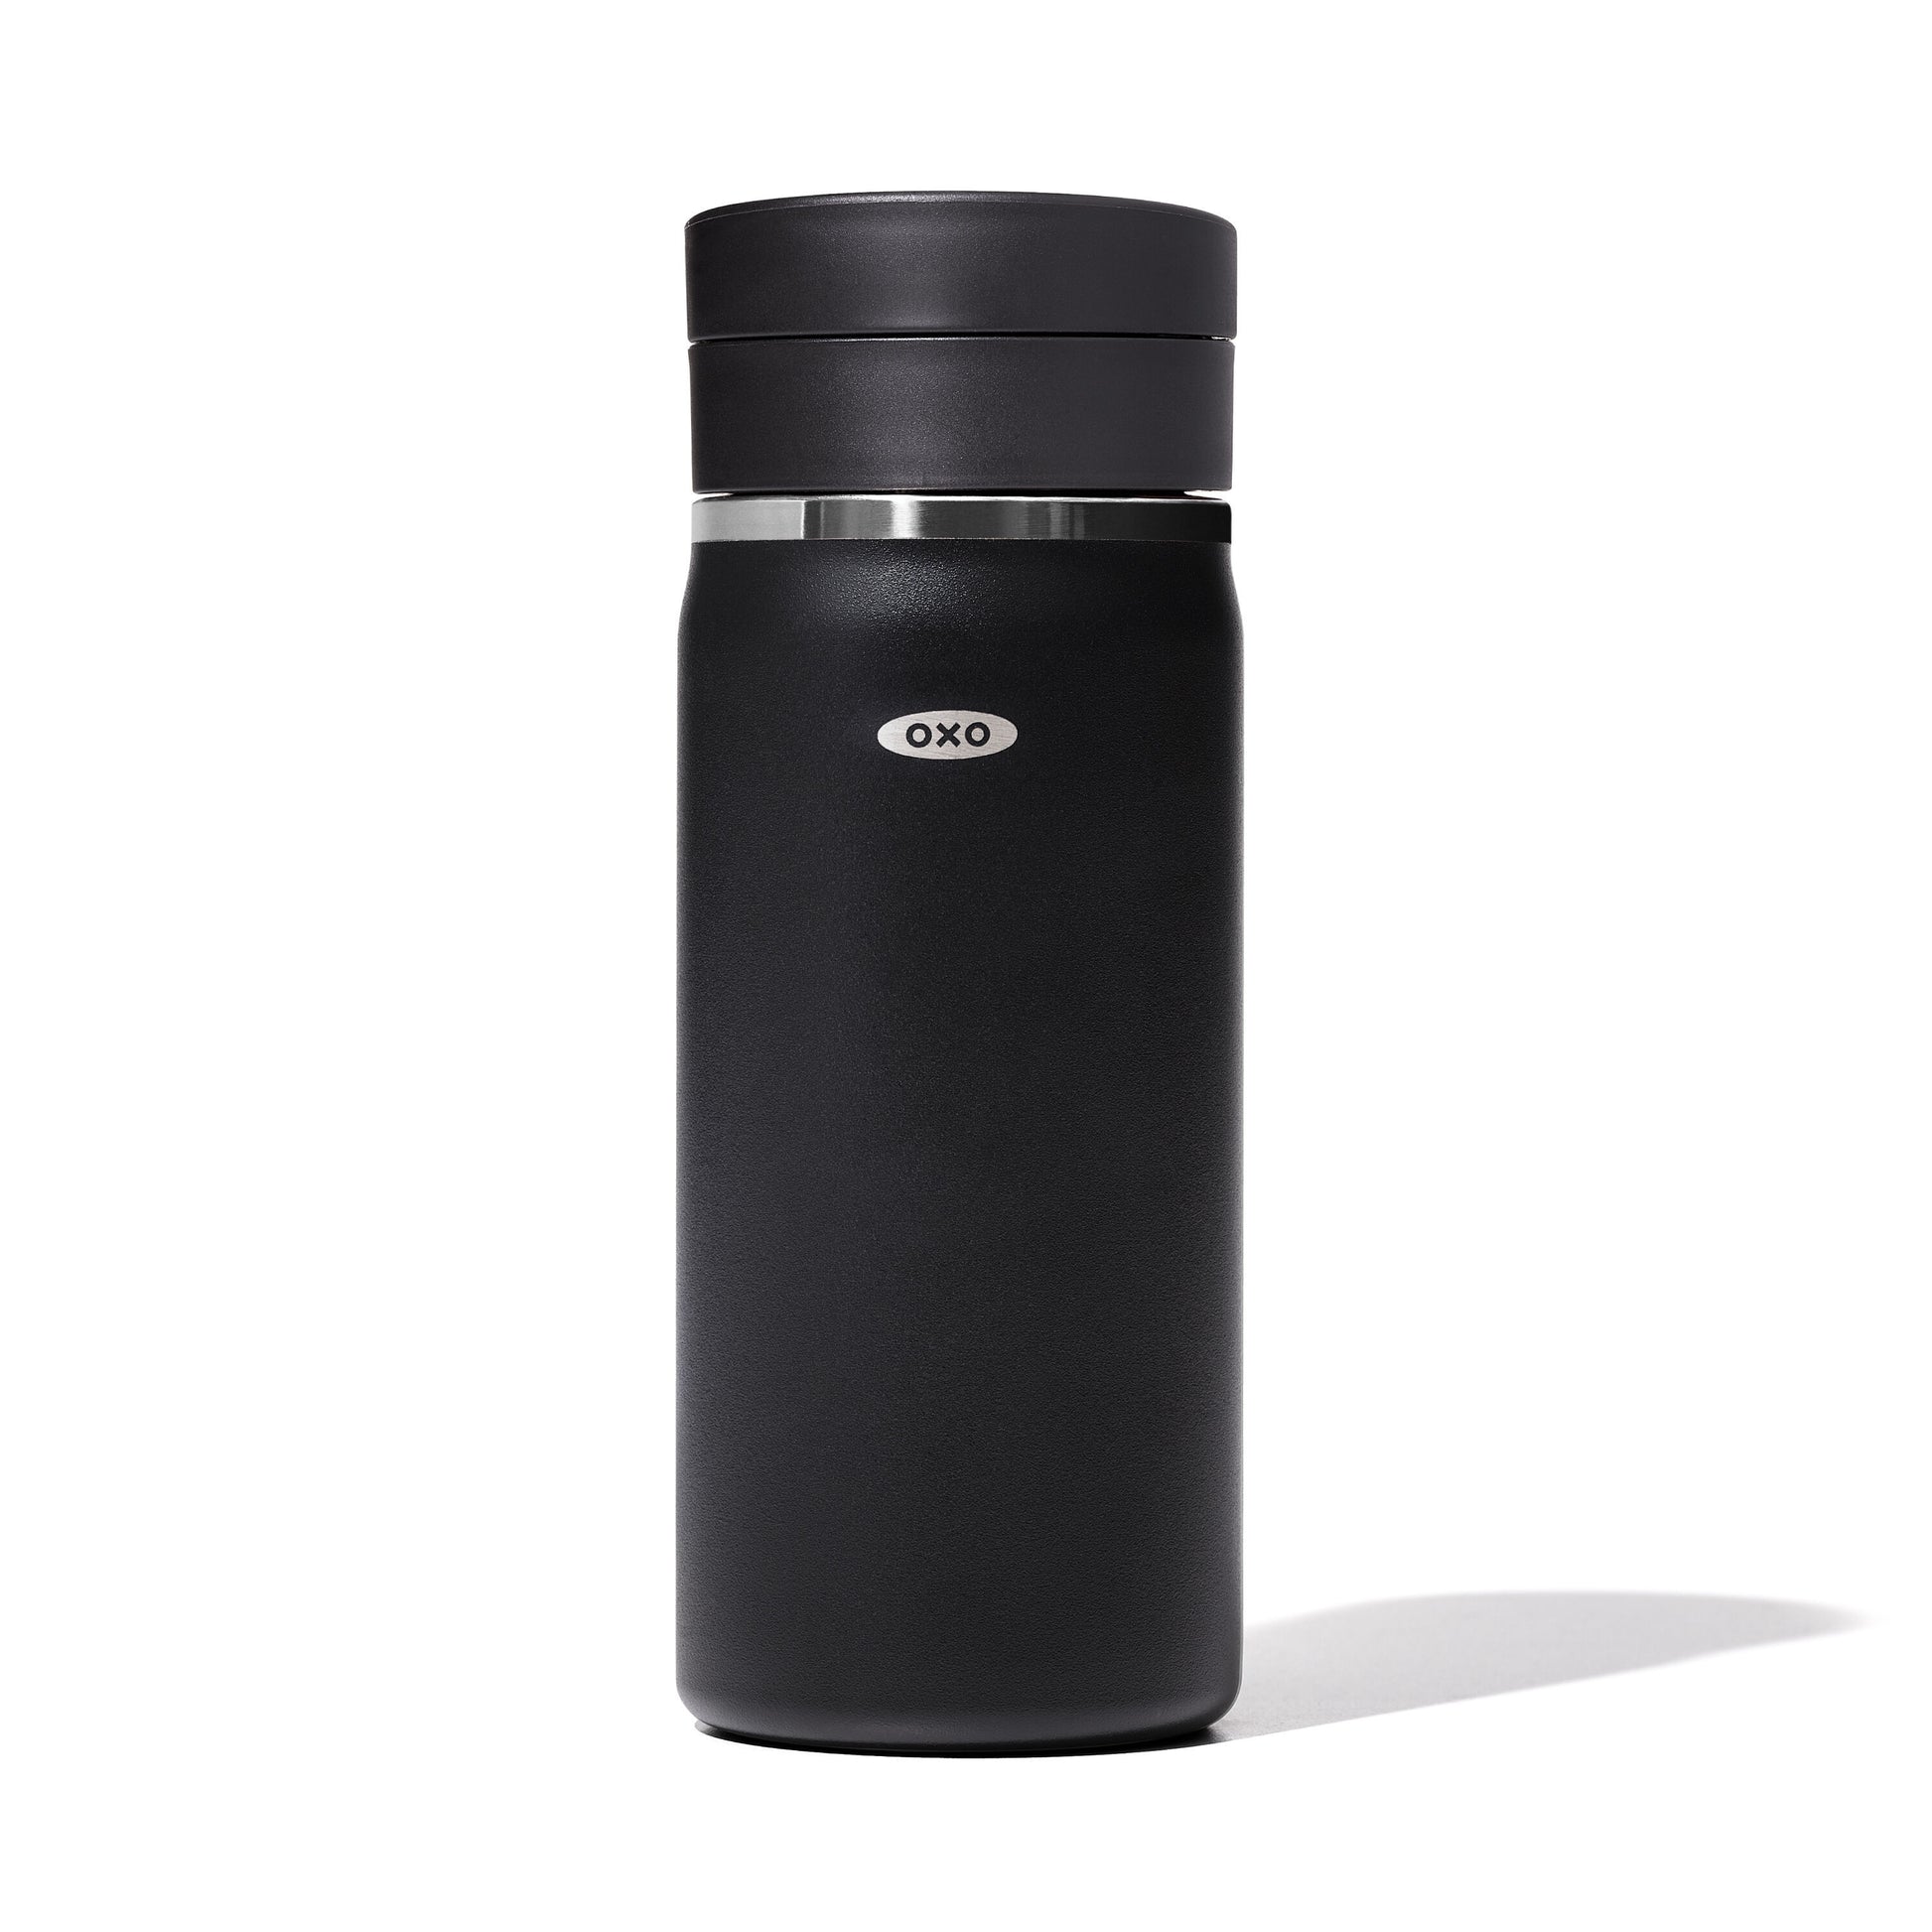 Thermal Mug- 16oz With SimplyClean Lid- OXO Black